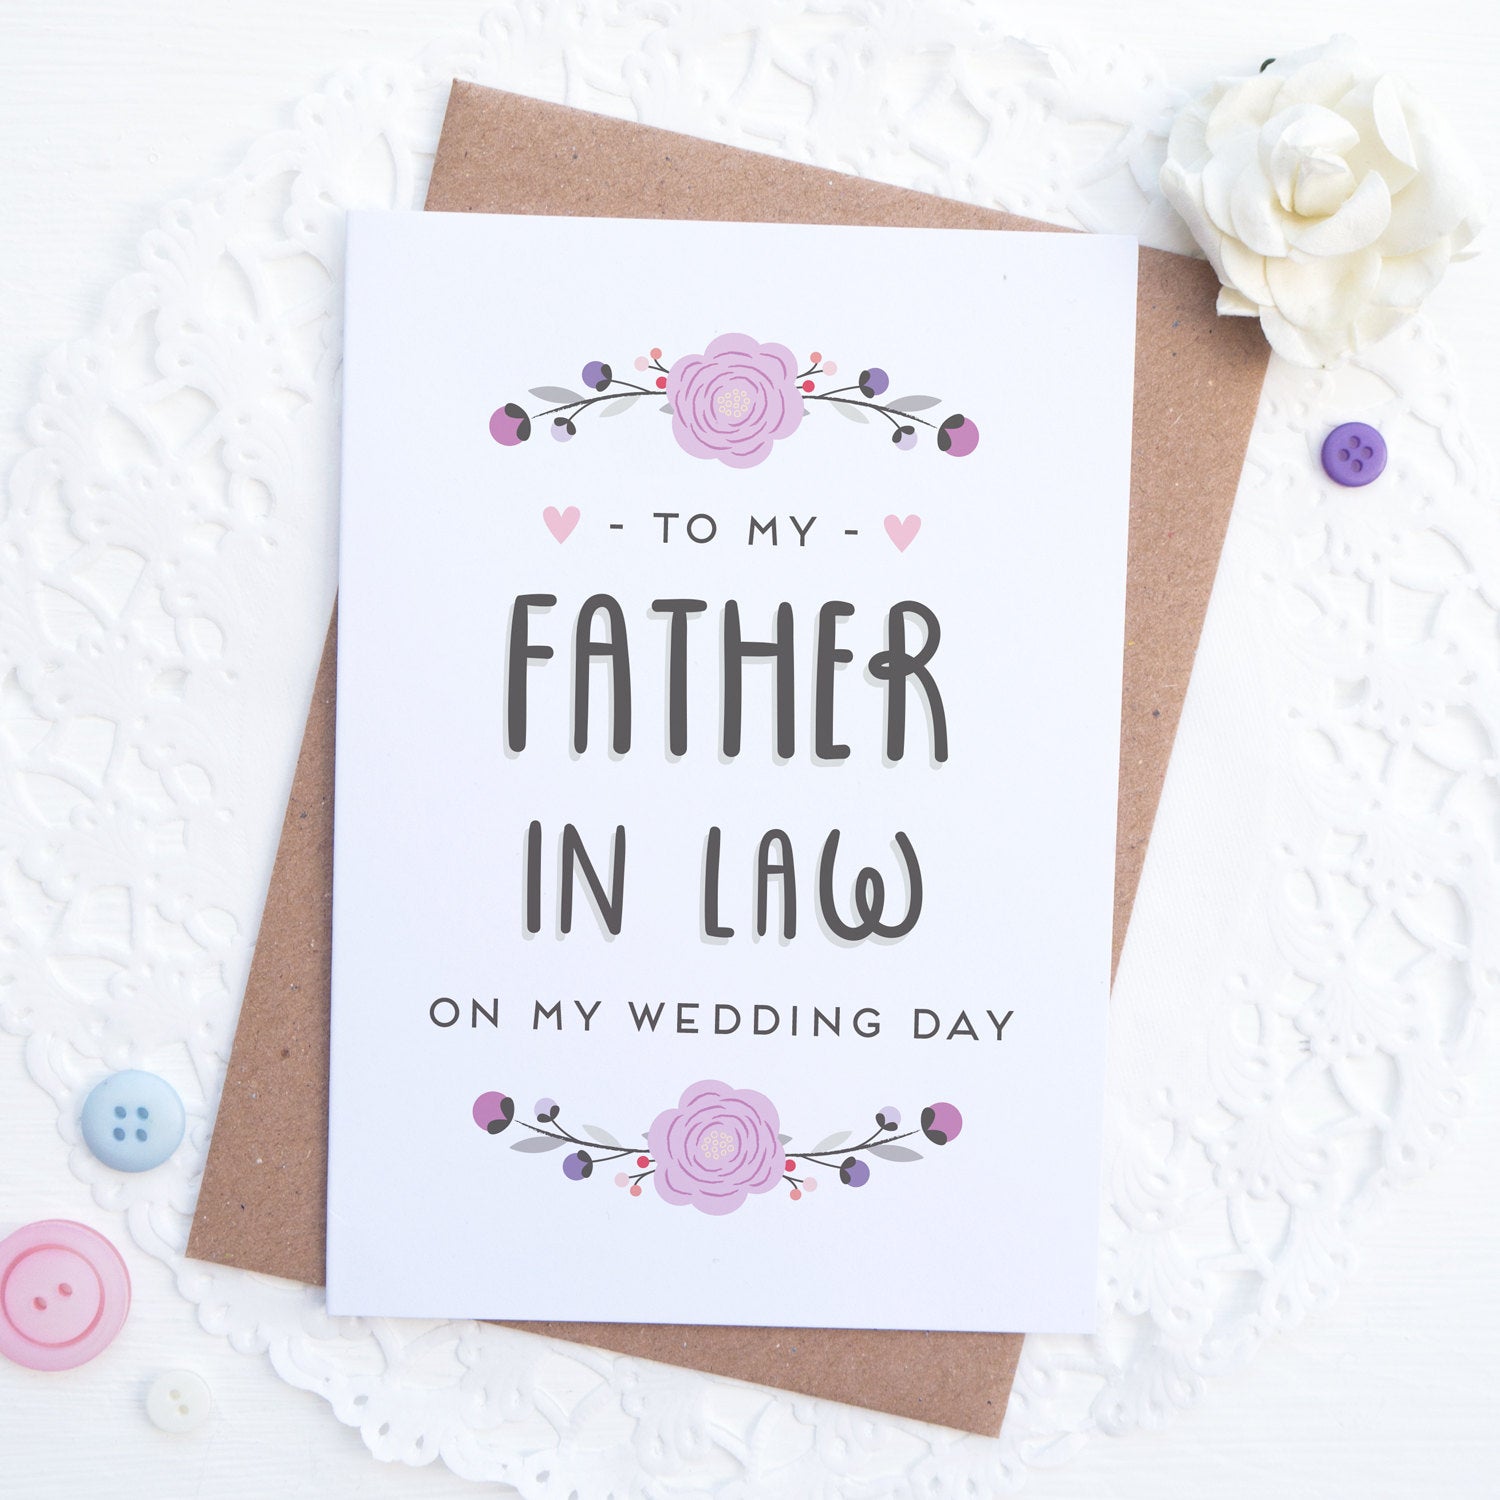 To my father in law on my wedding day card in purple